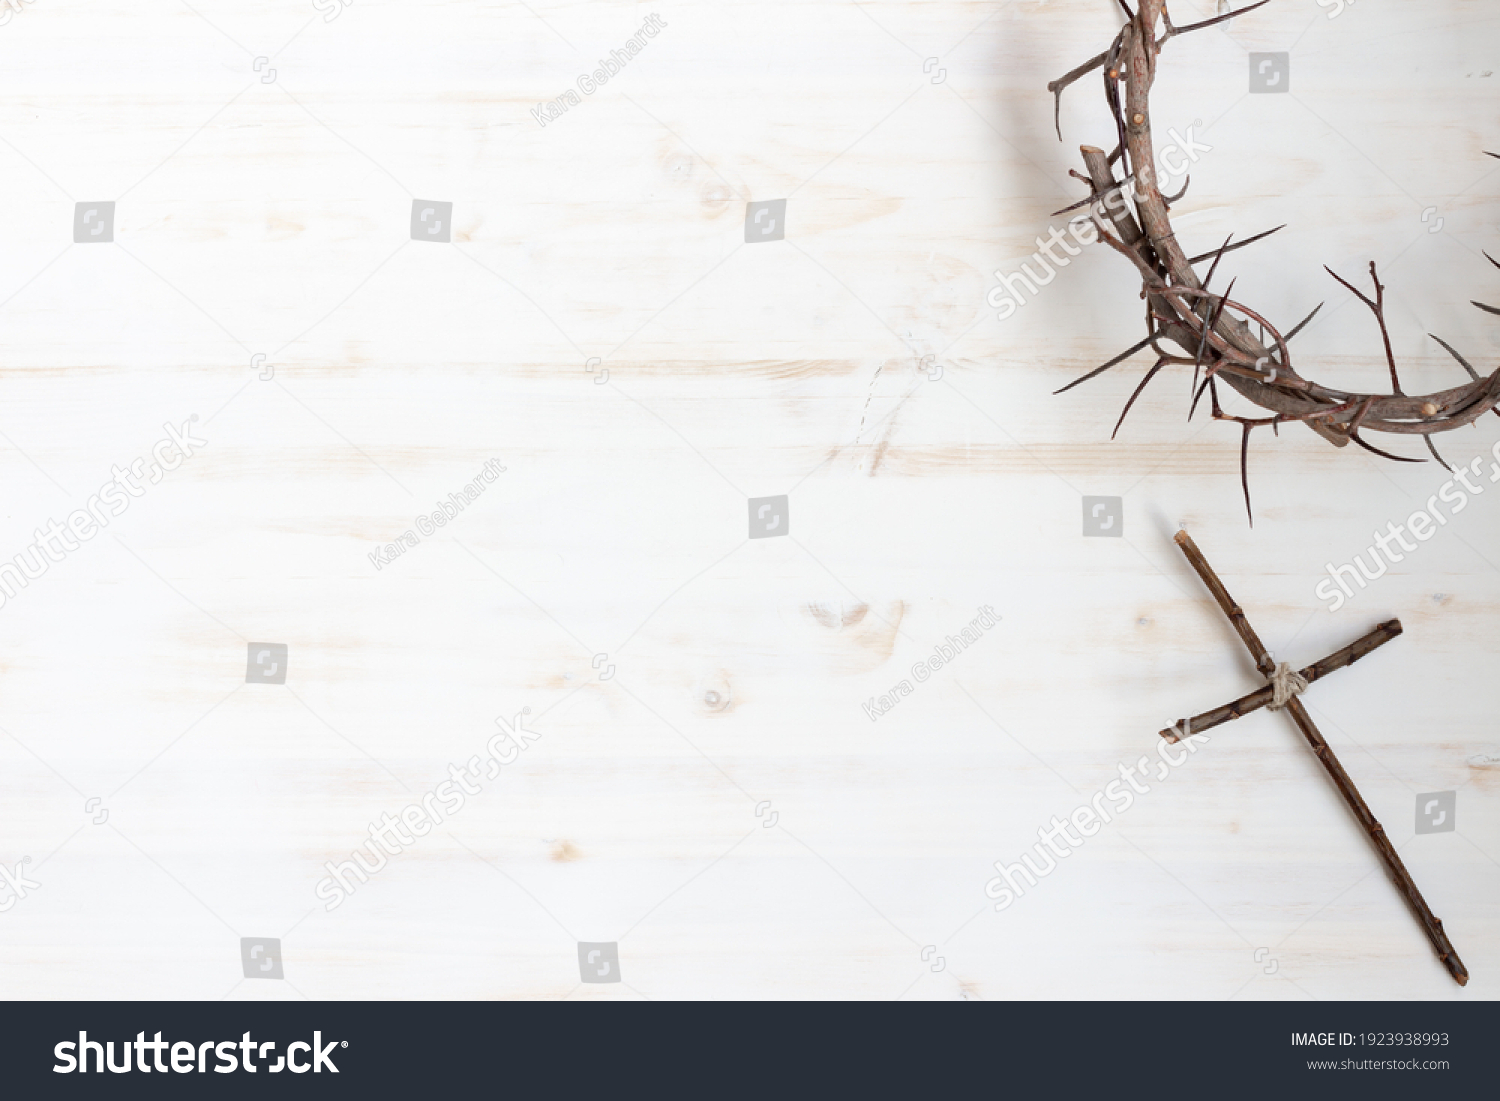 Crown of thorns with wood cross on white background with copy space #1923938993